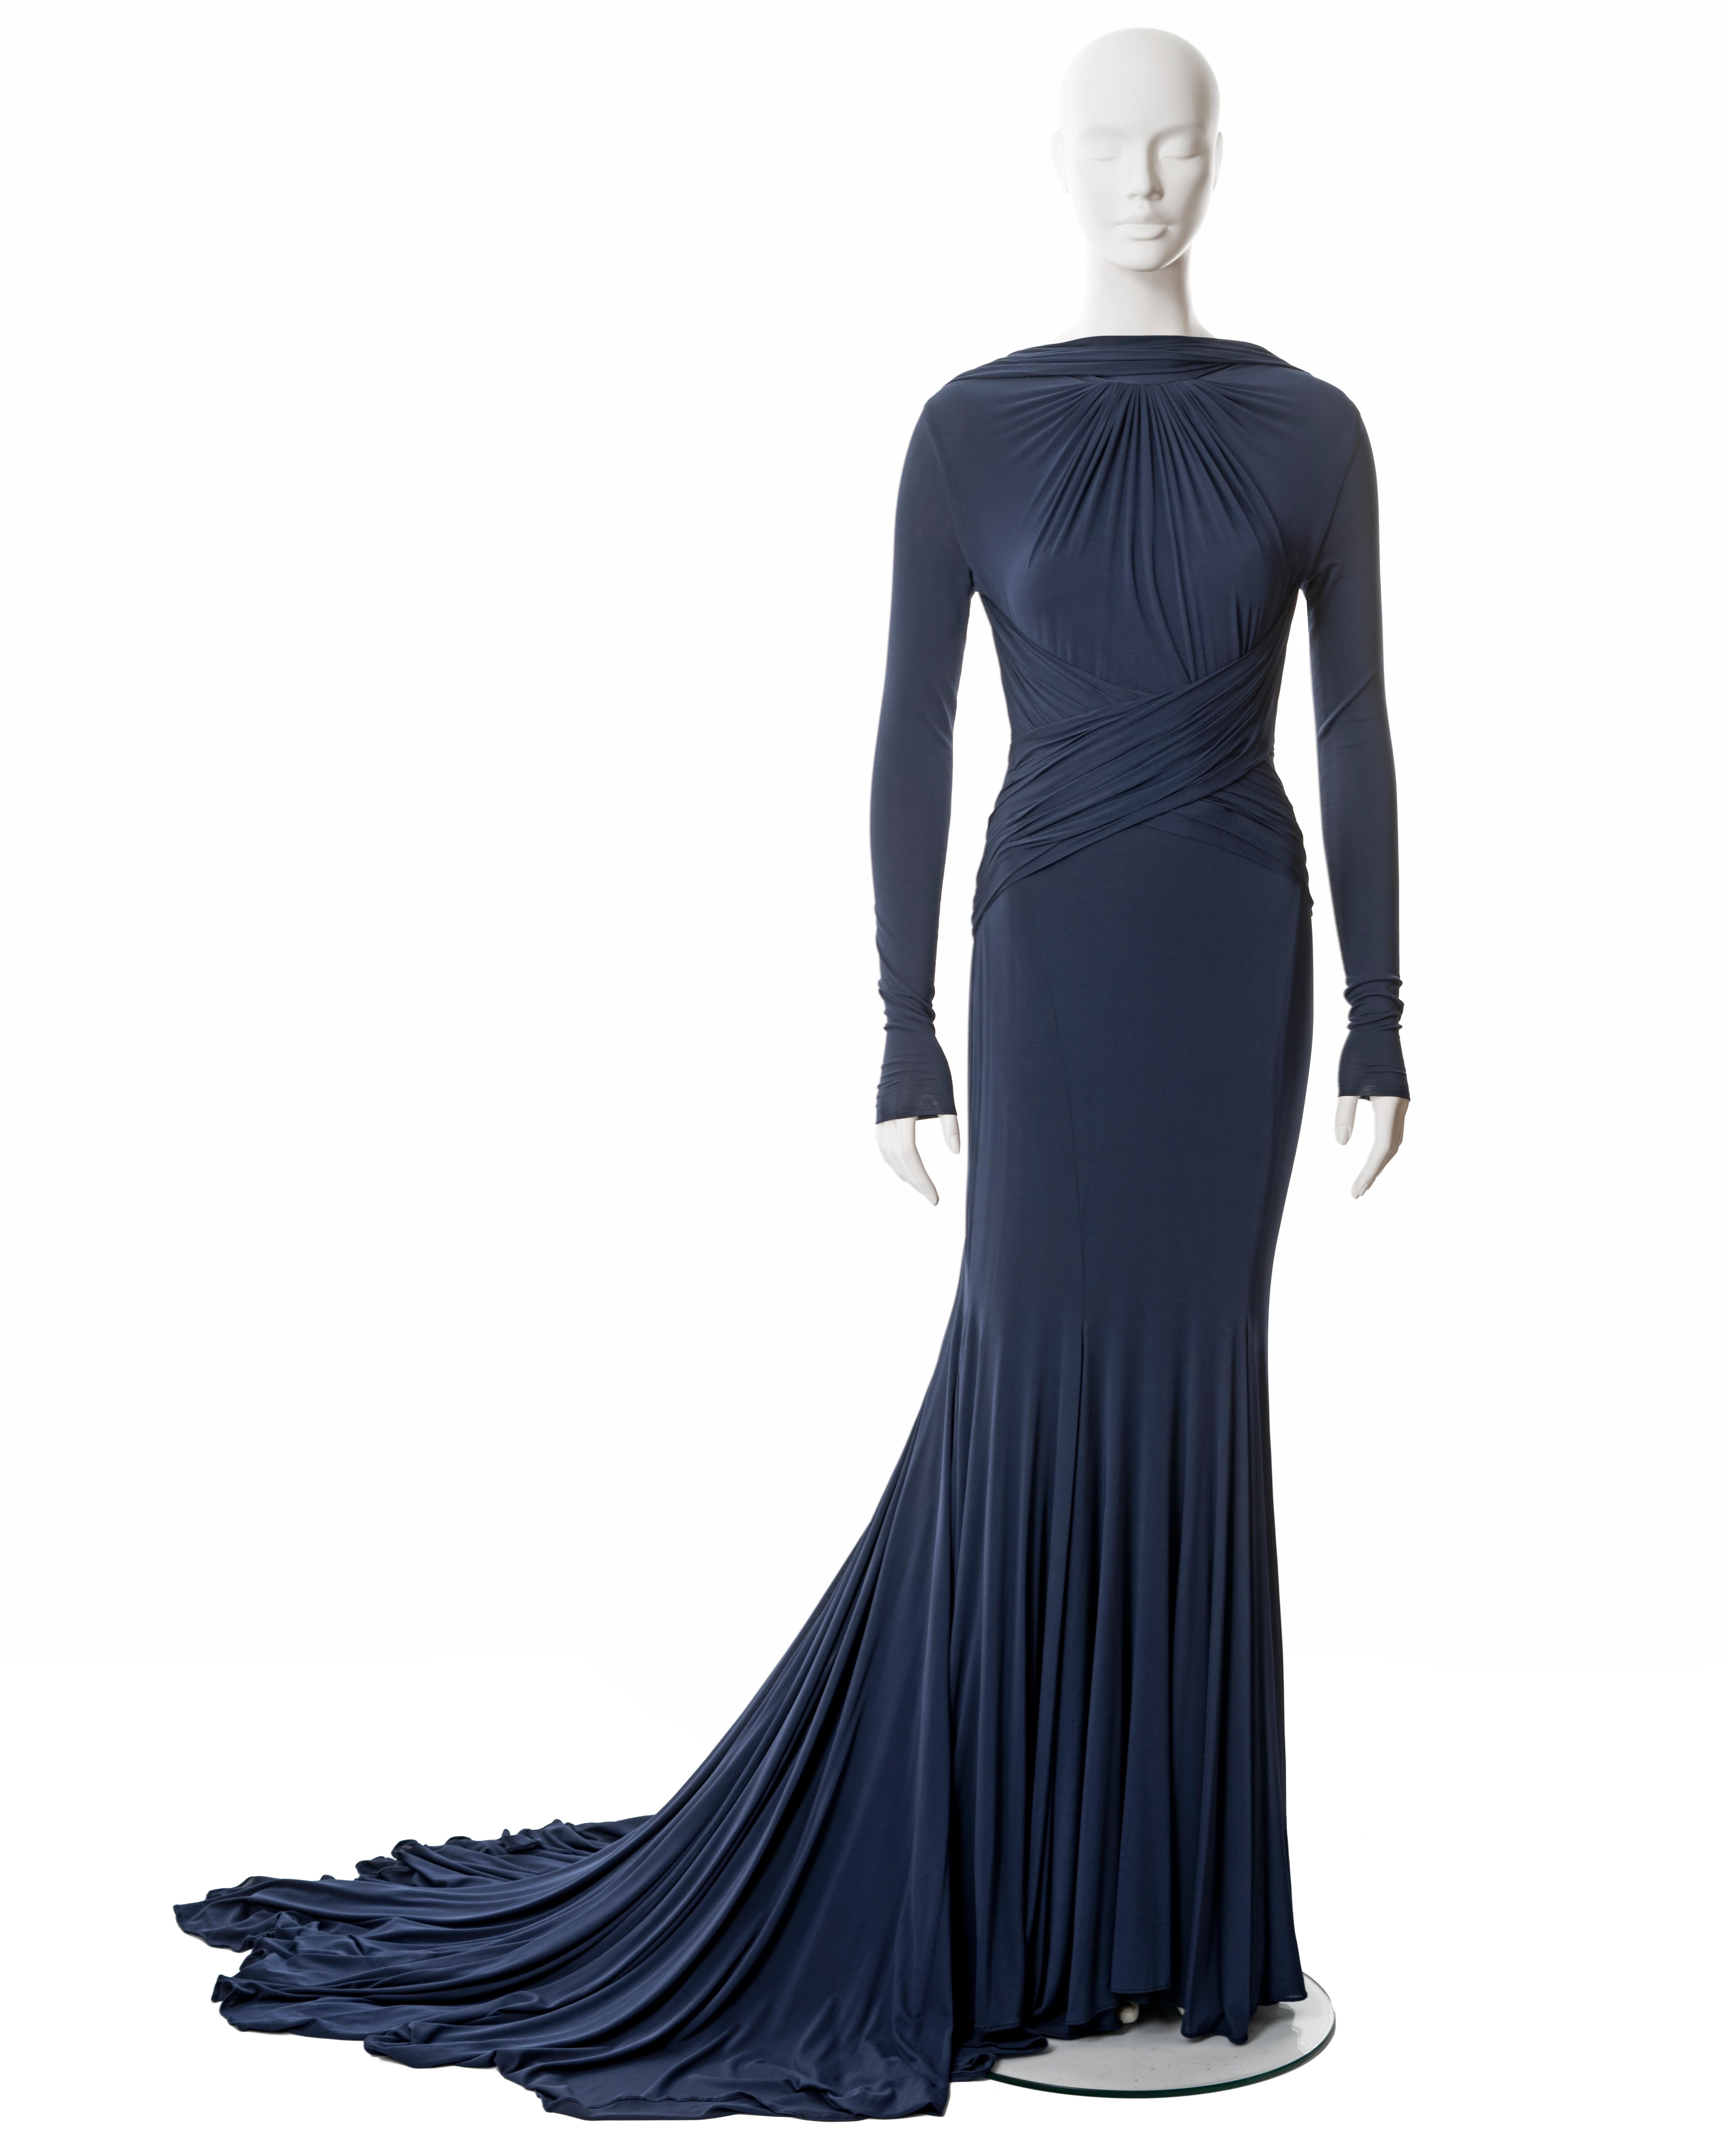 ▪ Guy Laroche navy blue Oscar dress
▪ Designed by Hervé L Leroux (Hervé Leger)
▪ Sold by One of a Kind Archive
▪ Spring-Summer 2005
▪ Constructed from 2 layers of navy blue viscose jersey
▪ Long fitted sleeves
▪ Open low back 
▪ Floor-length skirt